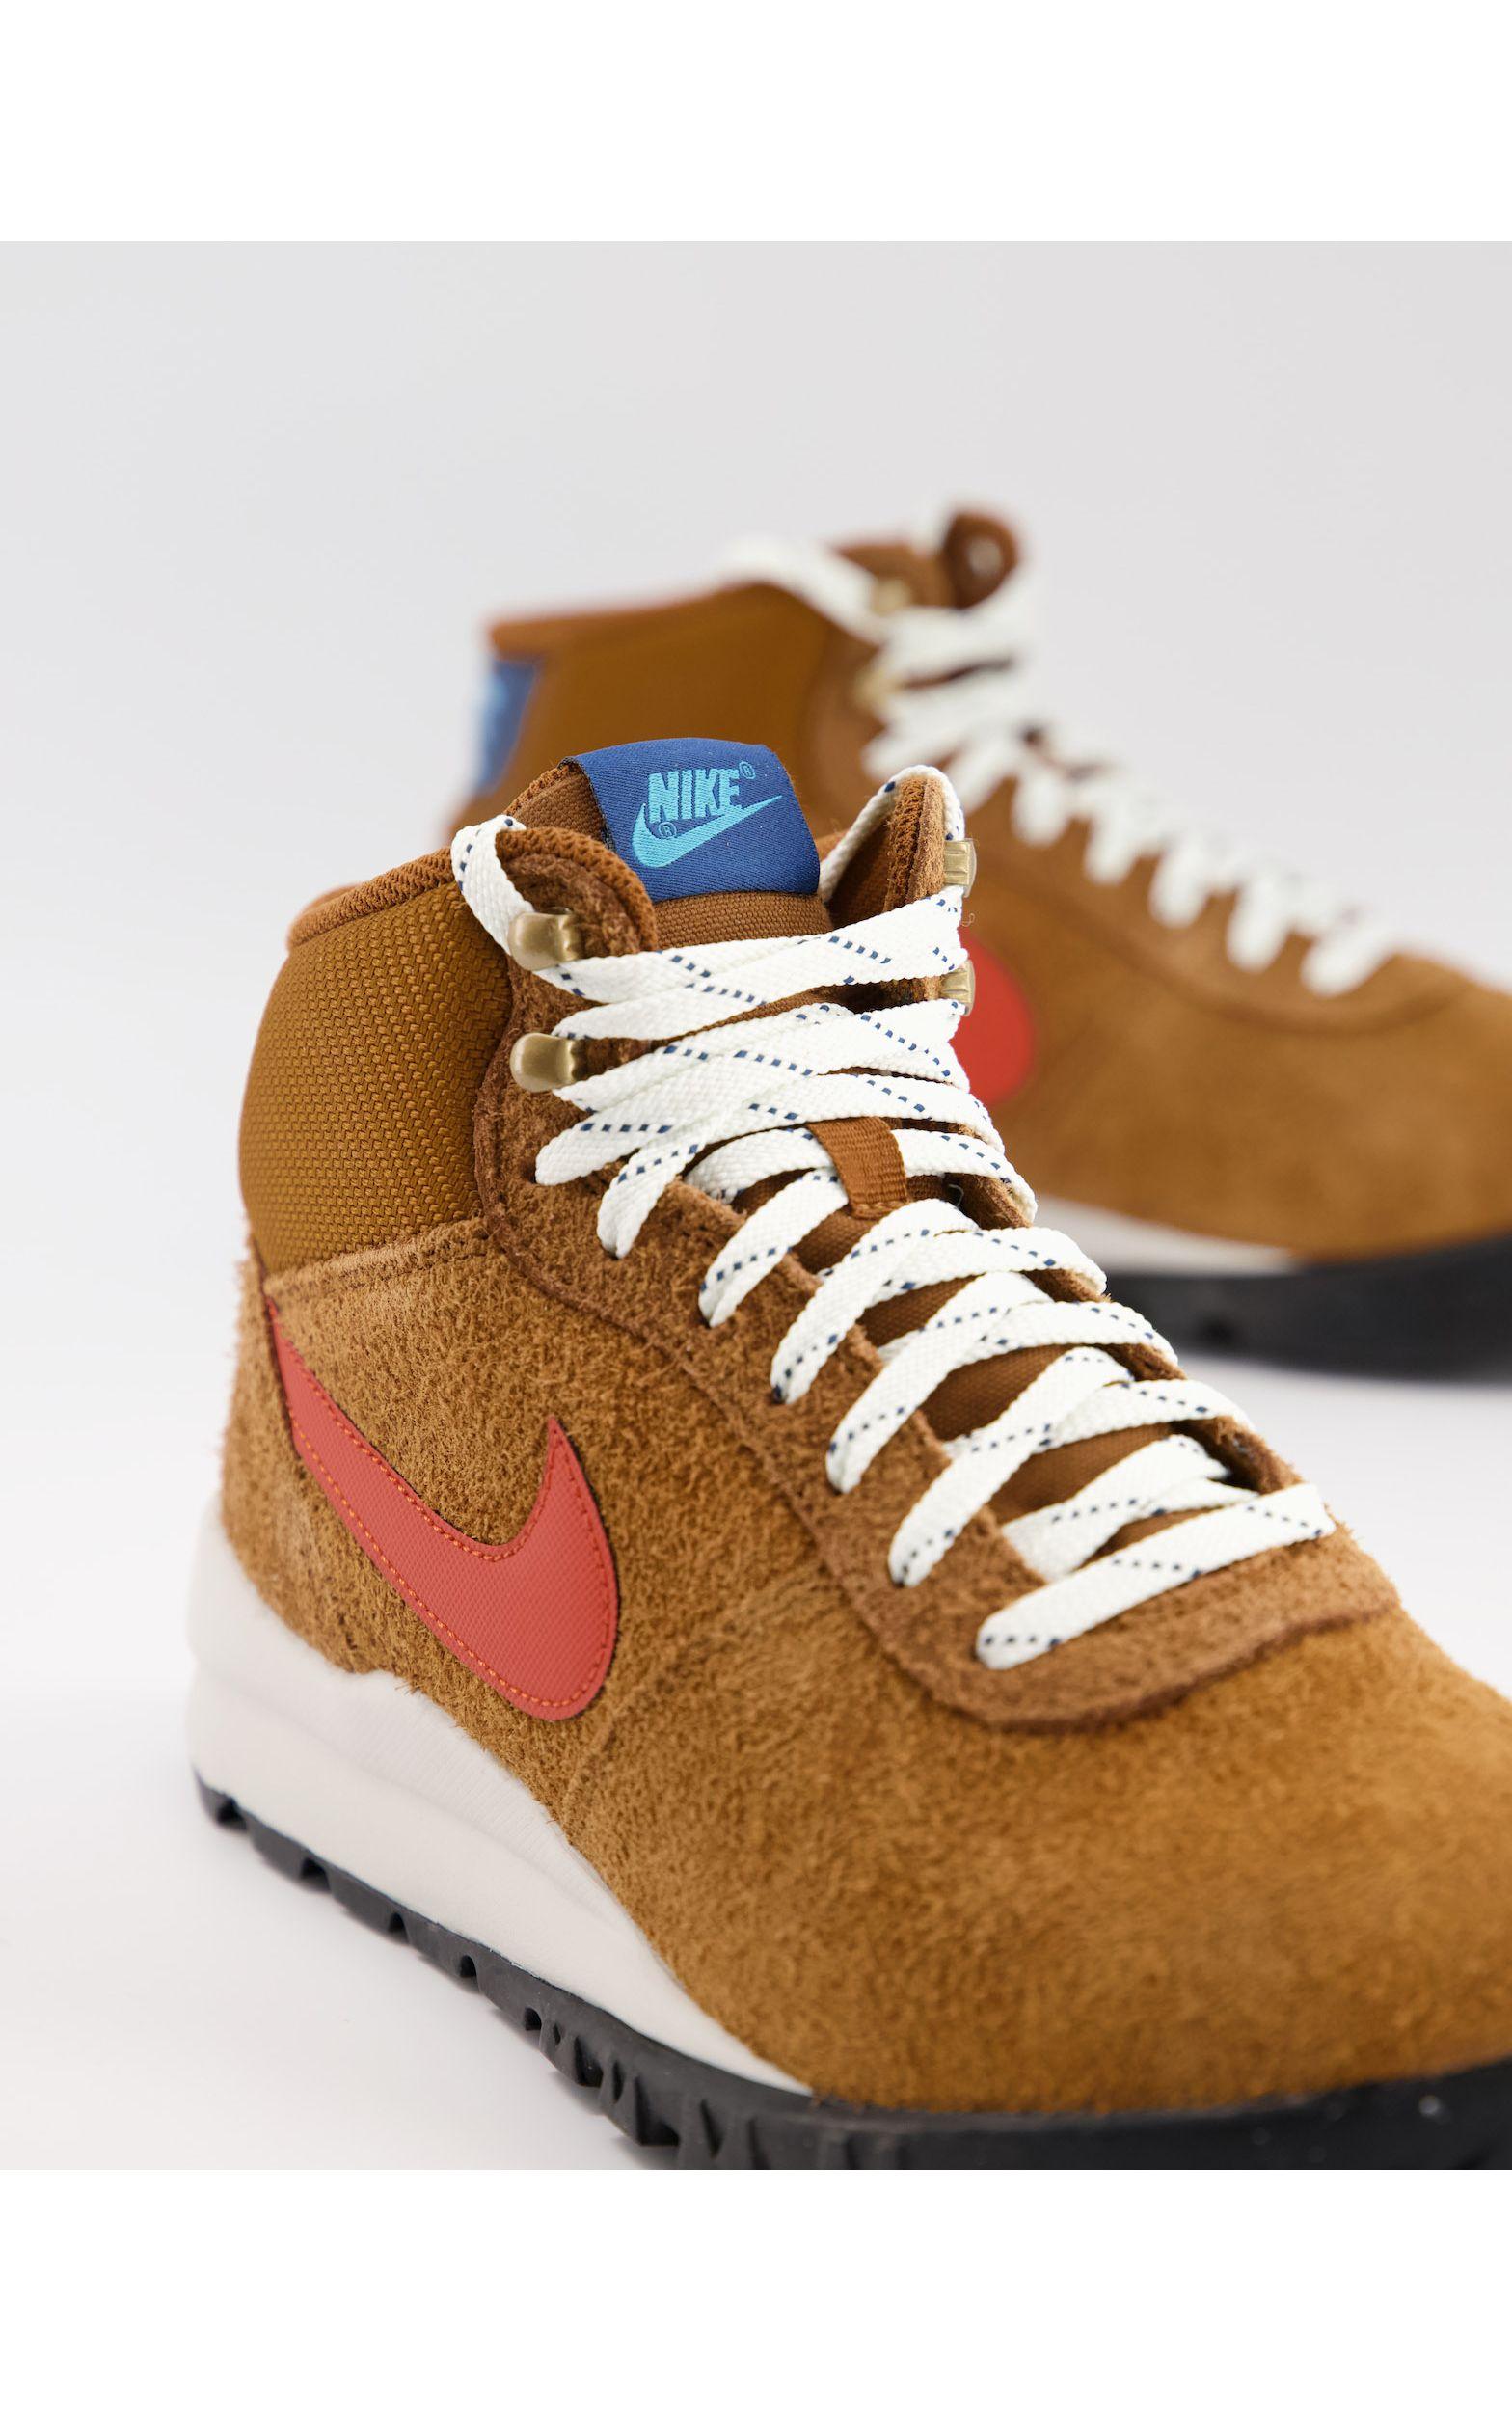 Nike Hoodland Suede Boots in Brown for Men - Lyst